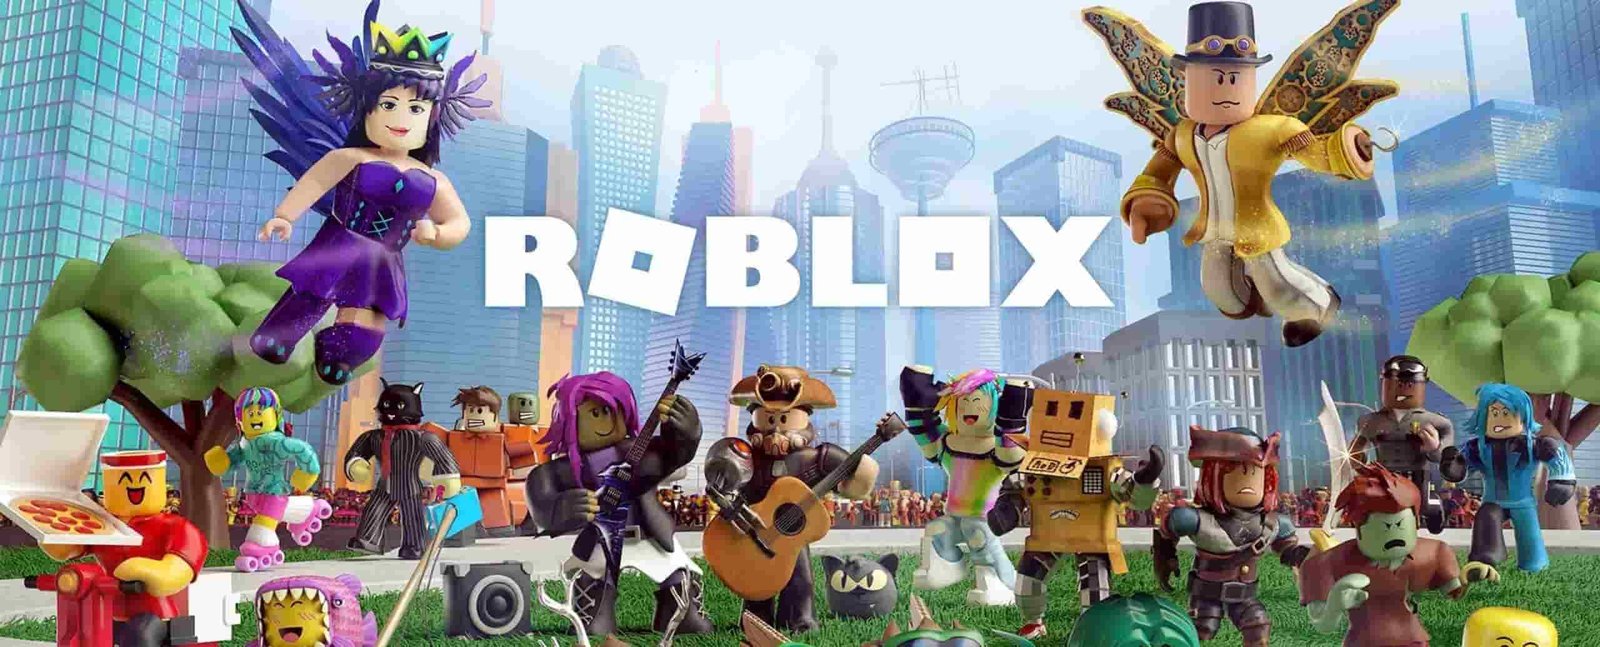 Roblox Voice Chat Feature Might Only Work For 18 Users Suggests Code Digistatement - roblox waiting for a